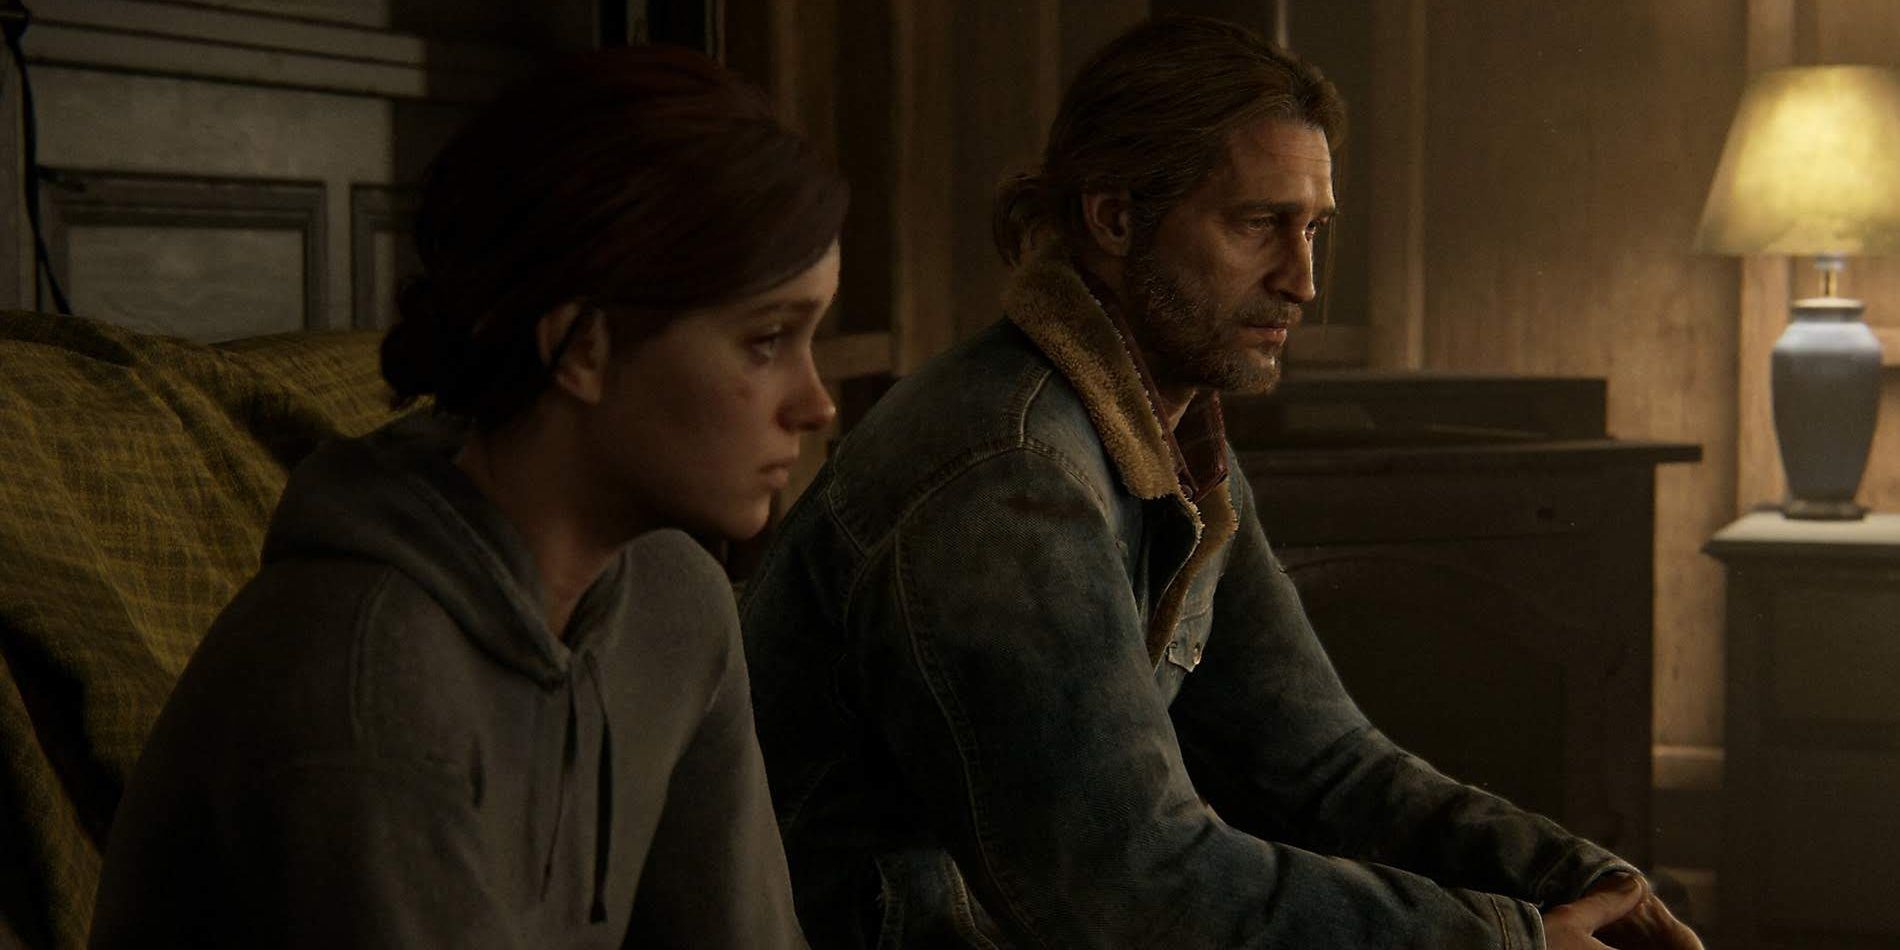 Ellie and Tommy sit together in The Last of Us Part II